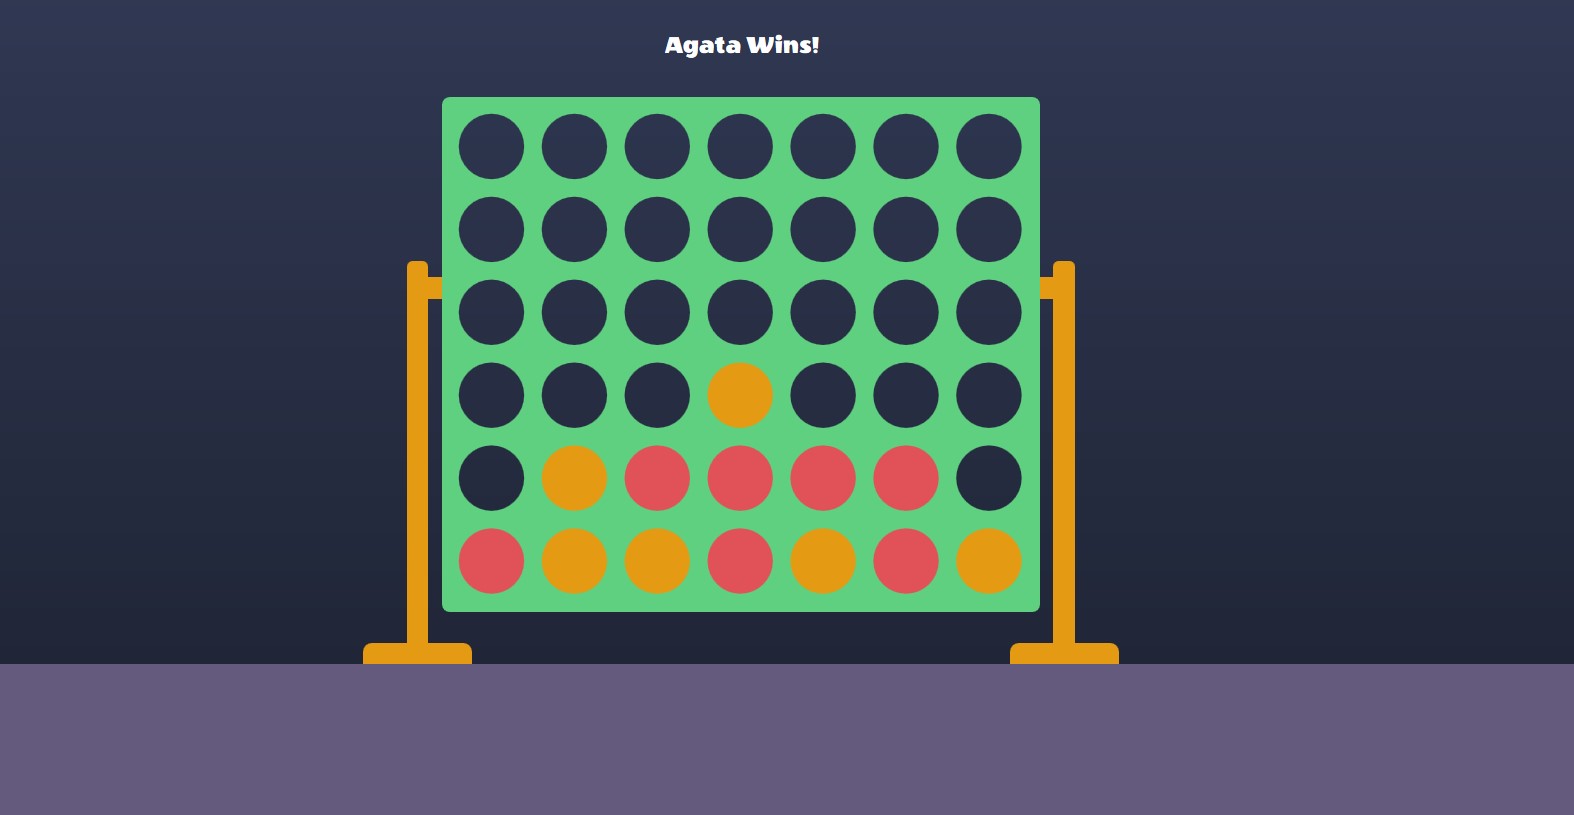 Sample screenshot of connect four game